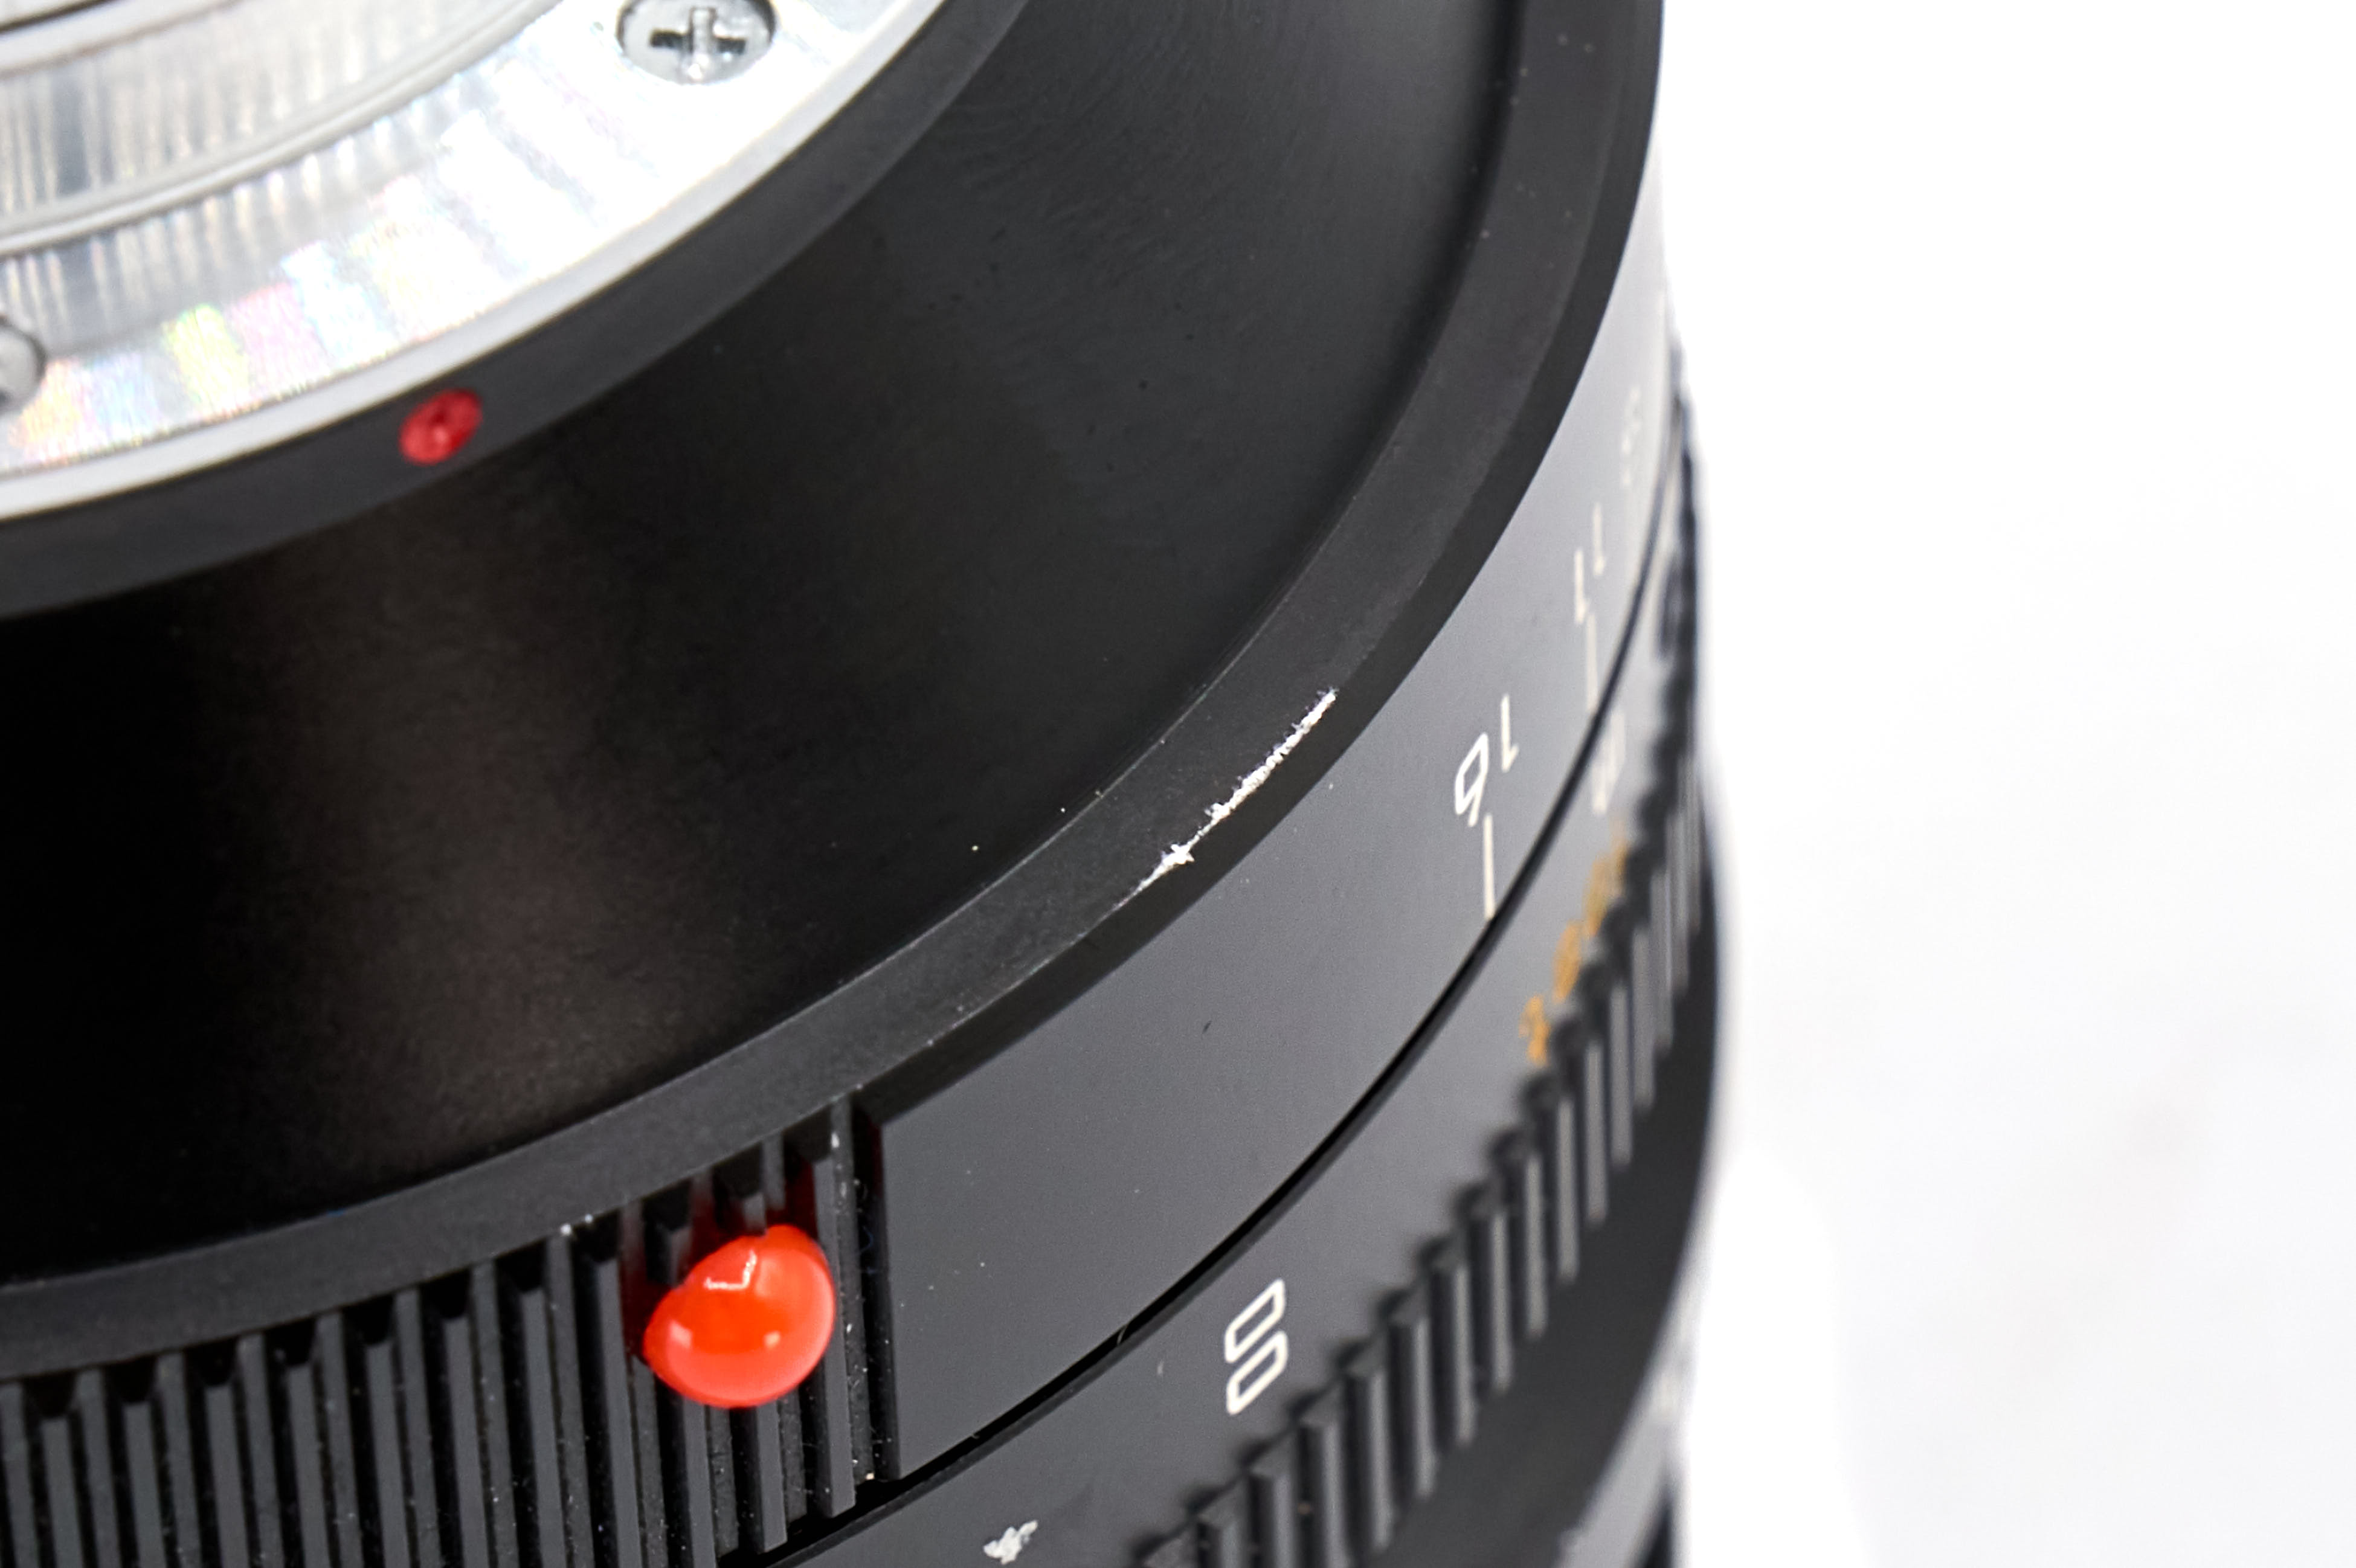 Leica Noctilux-M 50mm f/1 E60 with lens hood 11822